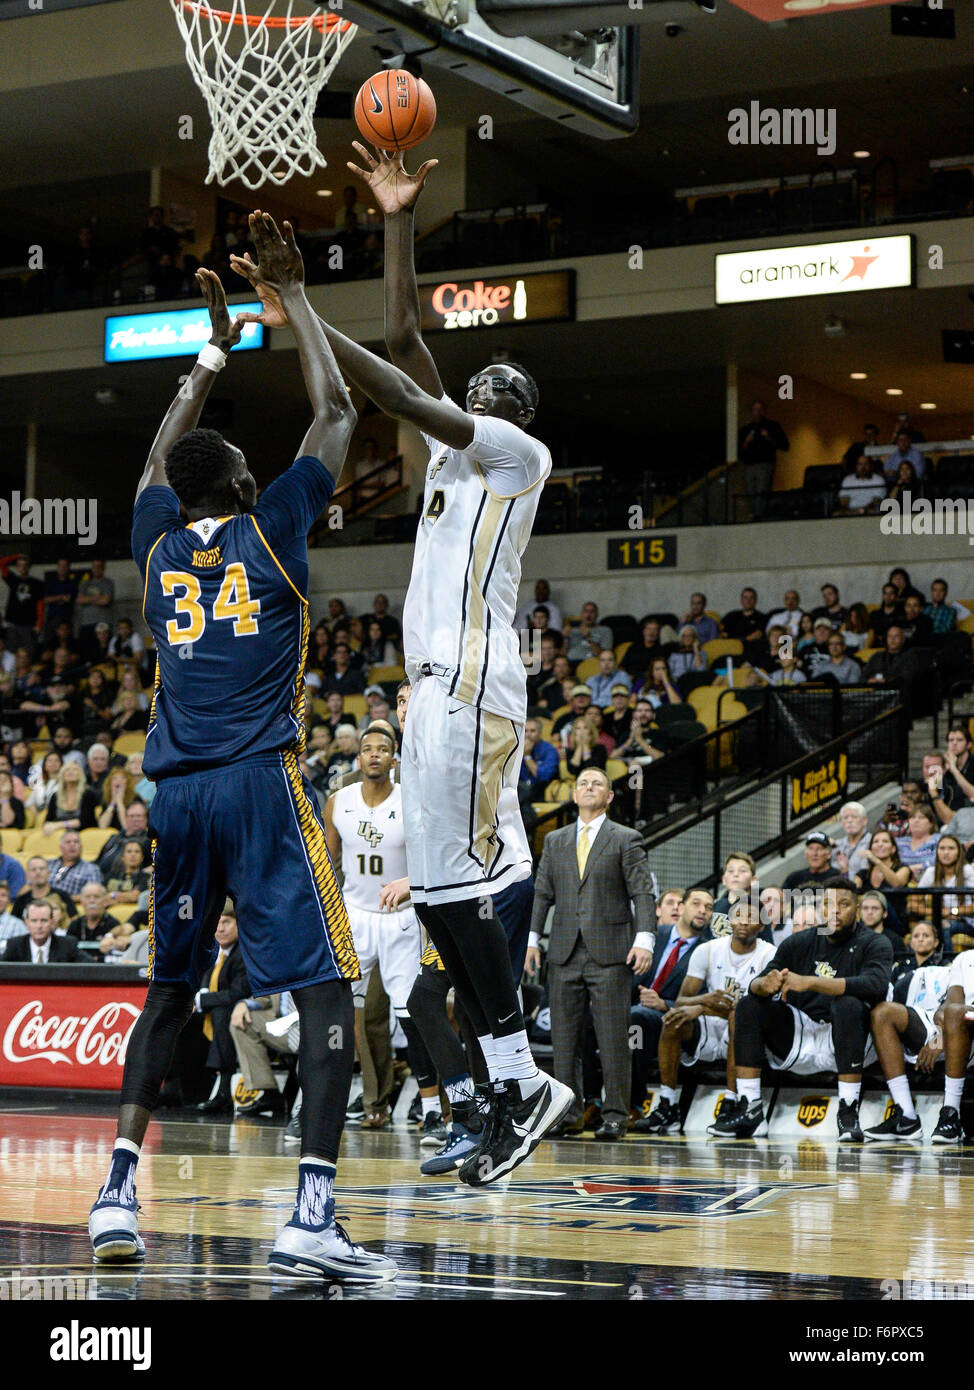 Orlando, FL, USA. 18th Nov, 2015. UCF Knights 7'6'' center Tacko Fall (24)  takes a shot over UC Irvine Anteaters 7'6'' center Mamadou Ndiaye (34)  during 2nd half mens NCAA basketball game